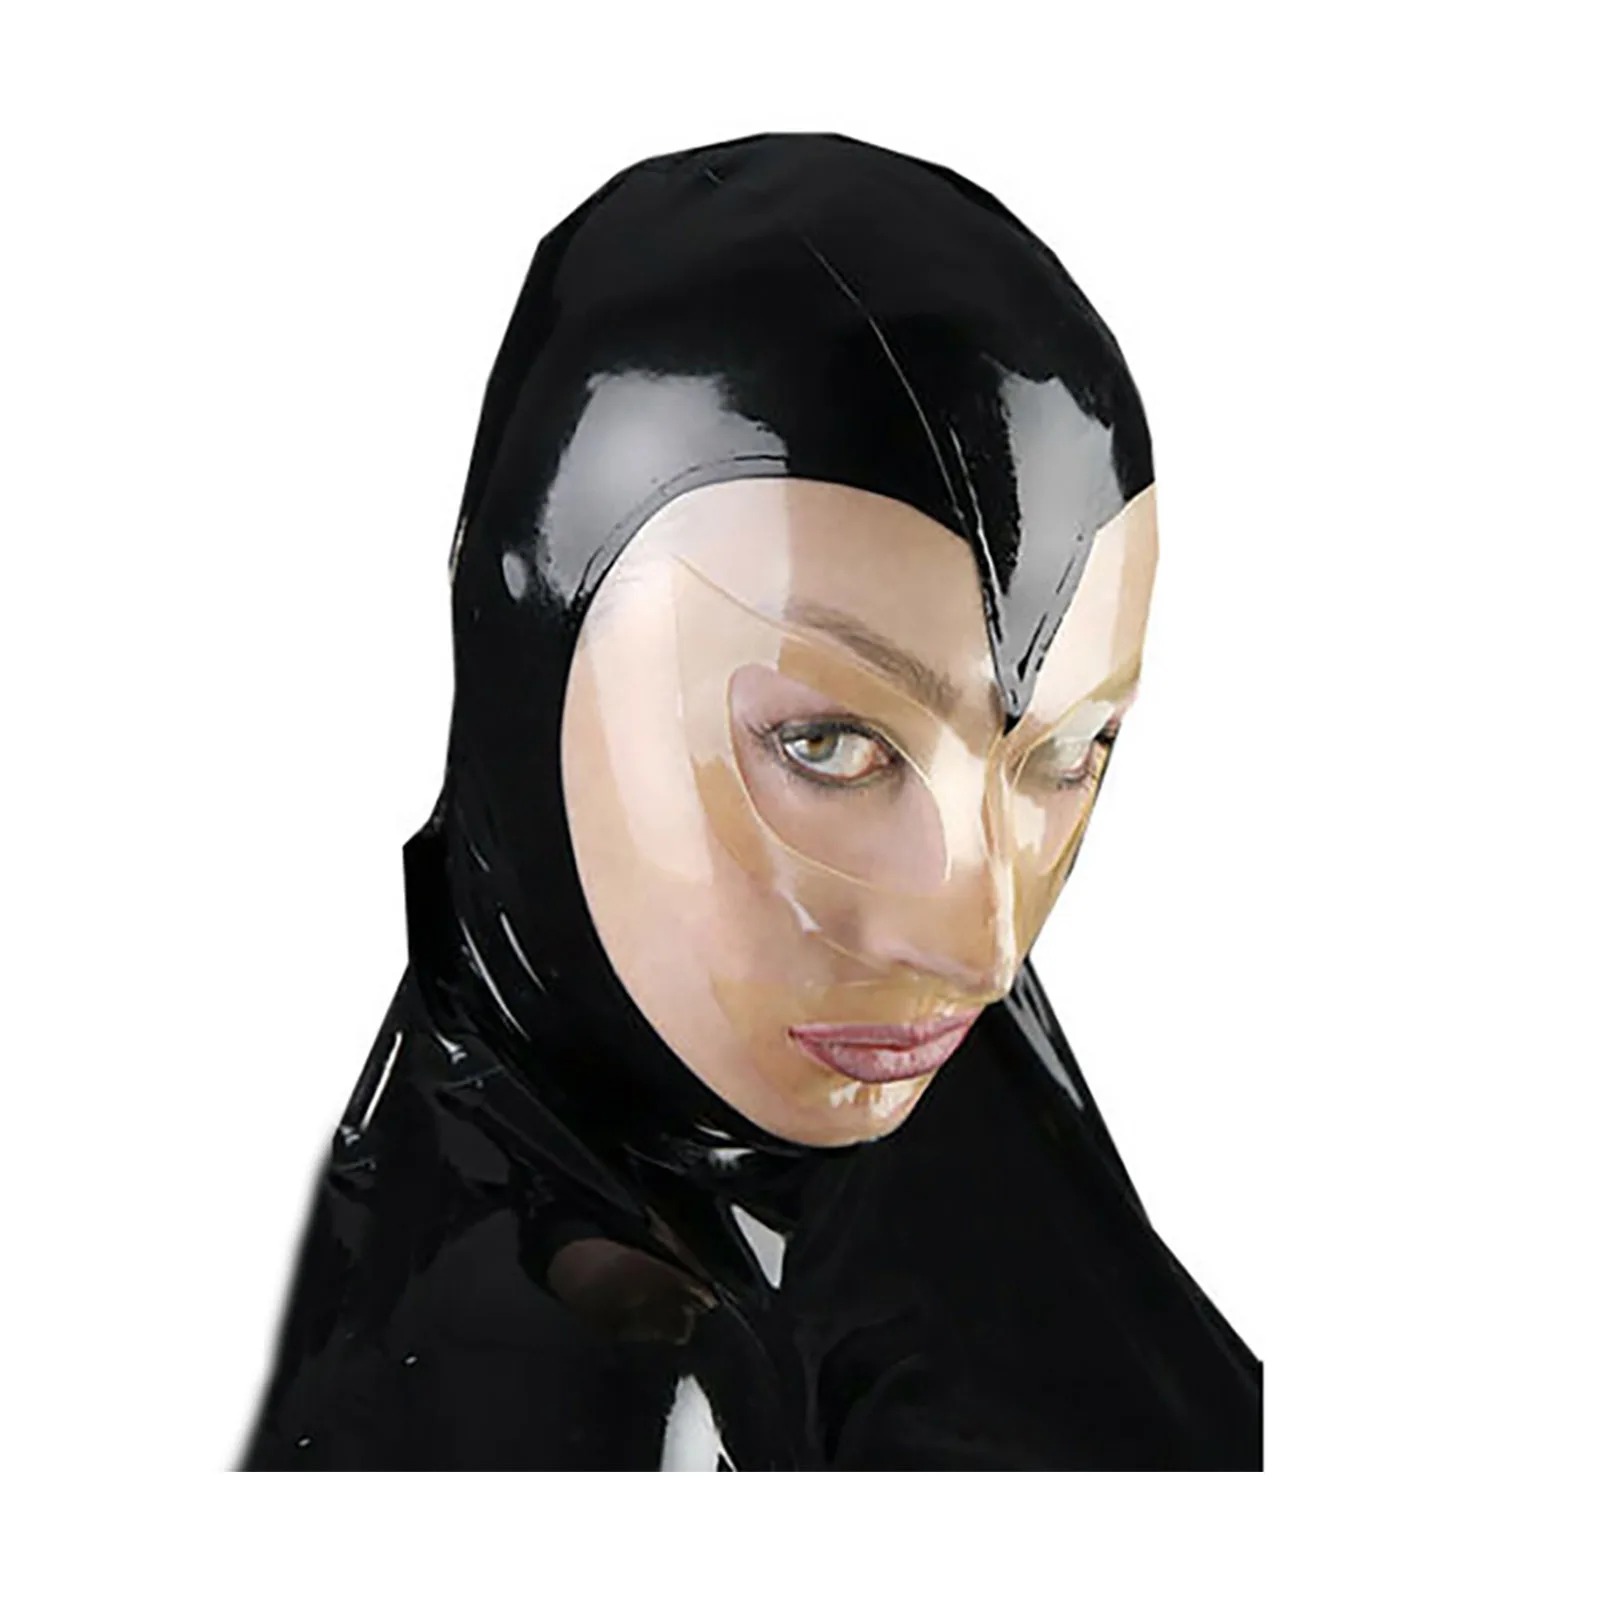 MONNIK Latex Mask Rubber Fashion Hood Two Color Open Eyes&Mouth with Rear Zipper Handmade for Unisex Bodysuit Cosplay Party monnik latex hood rubber hood contrast colored trim around face around eyes